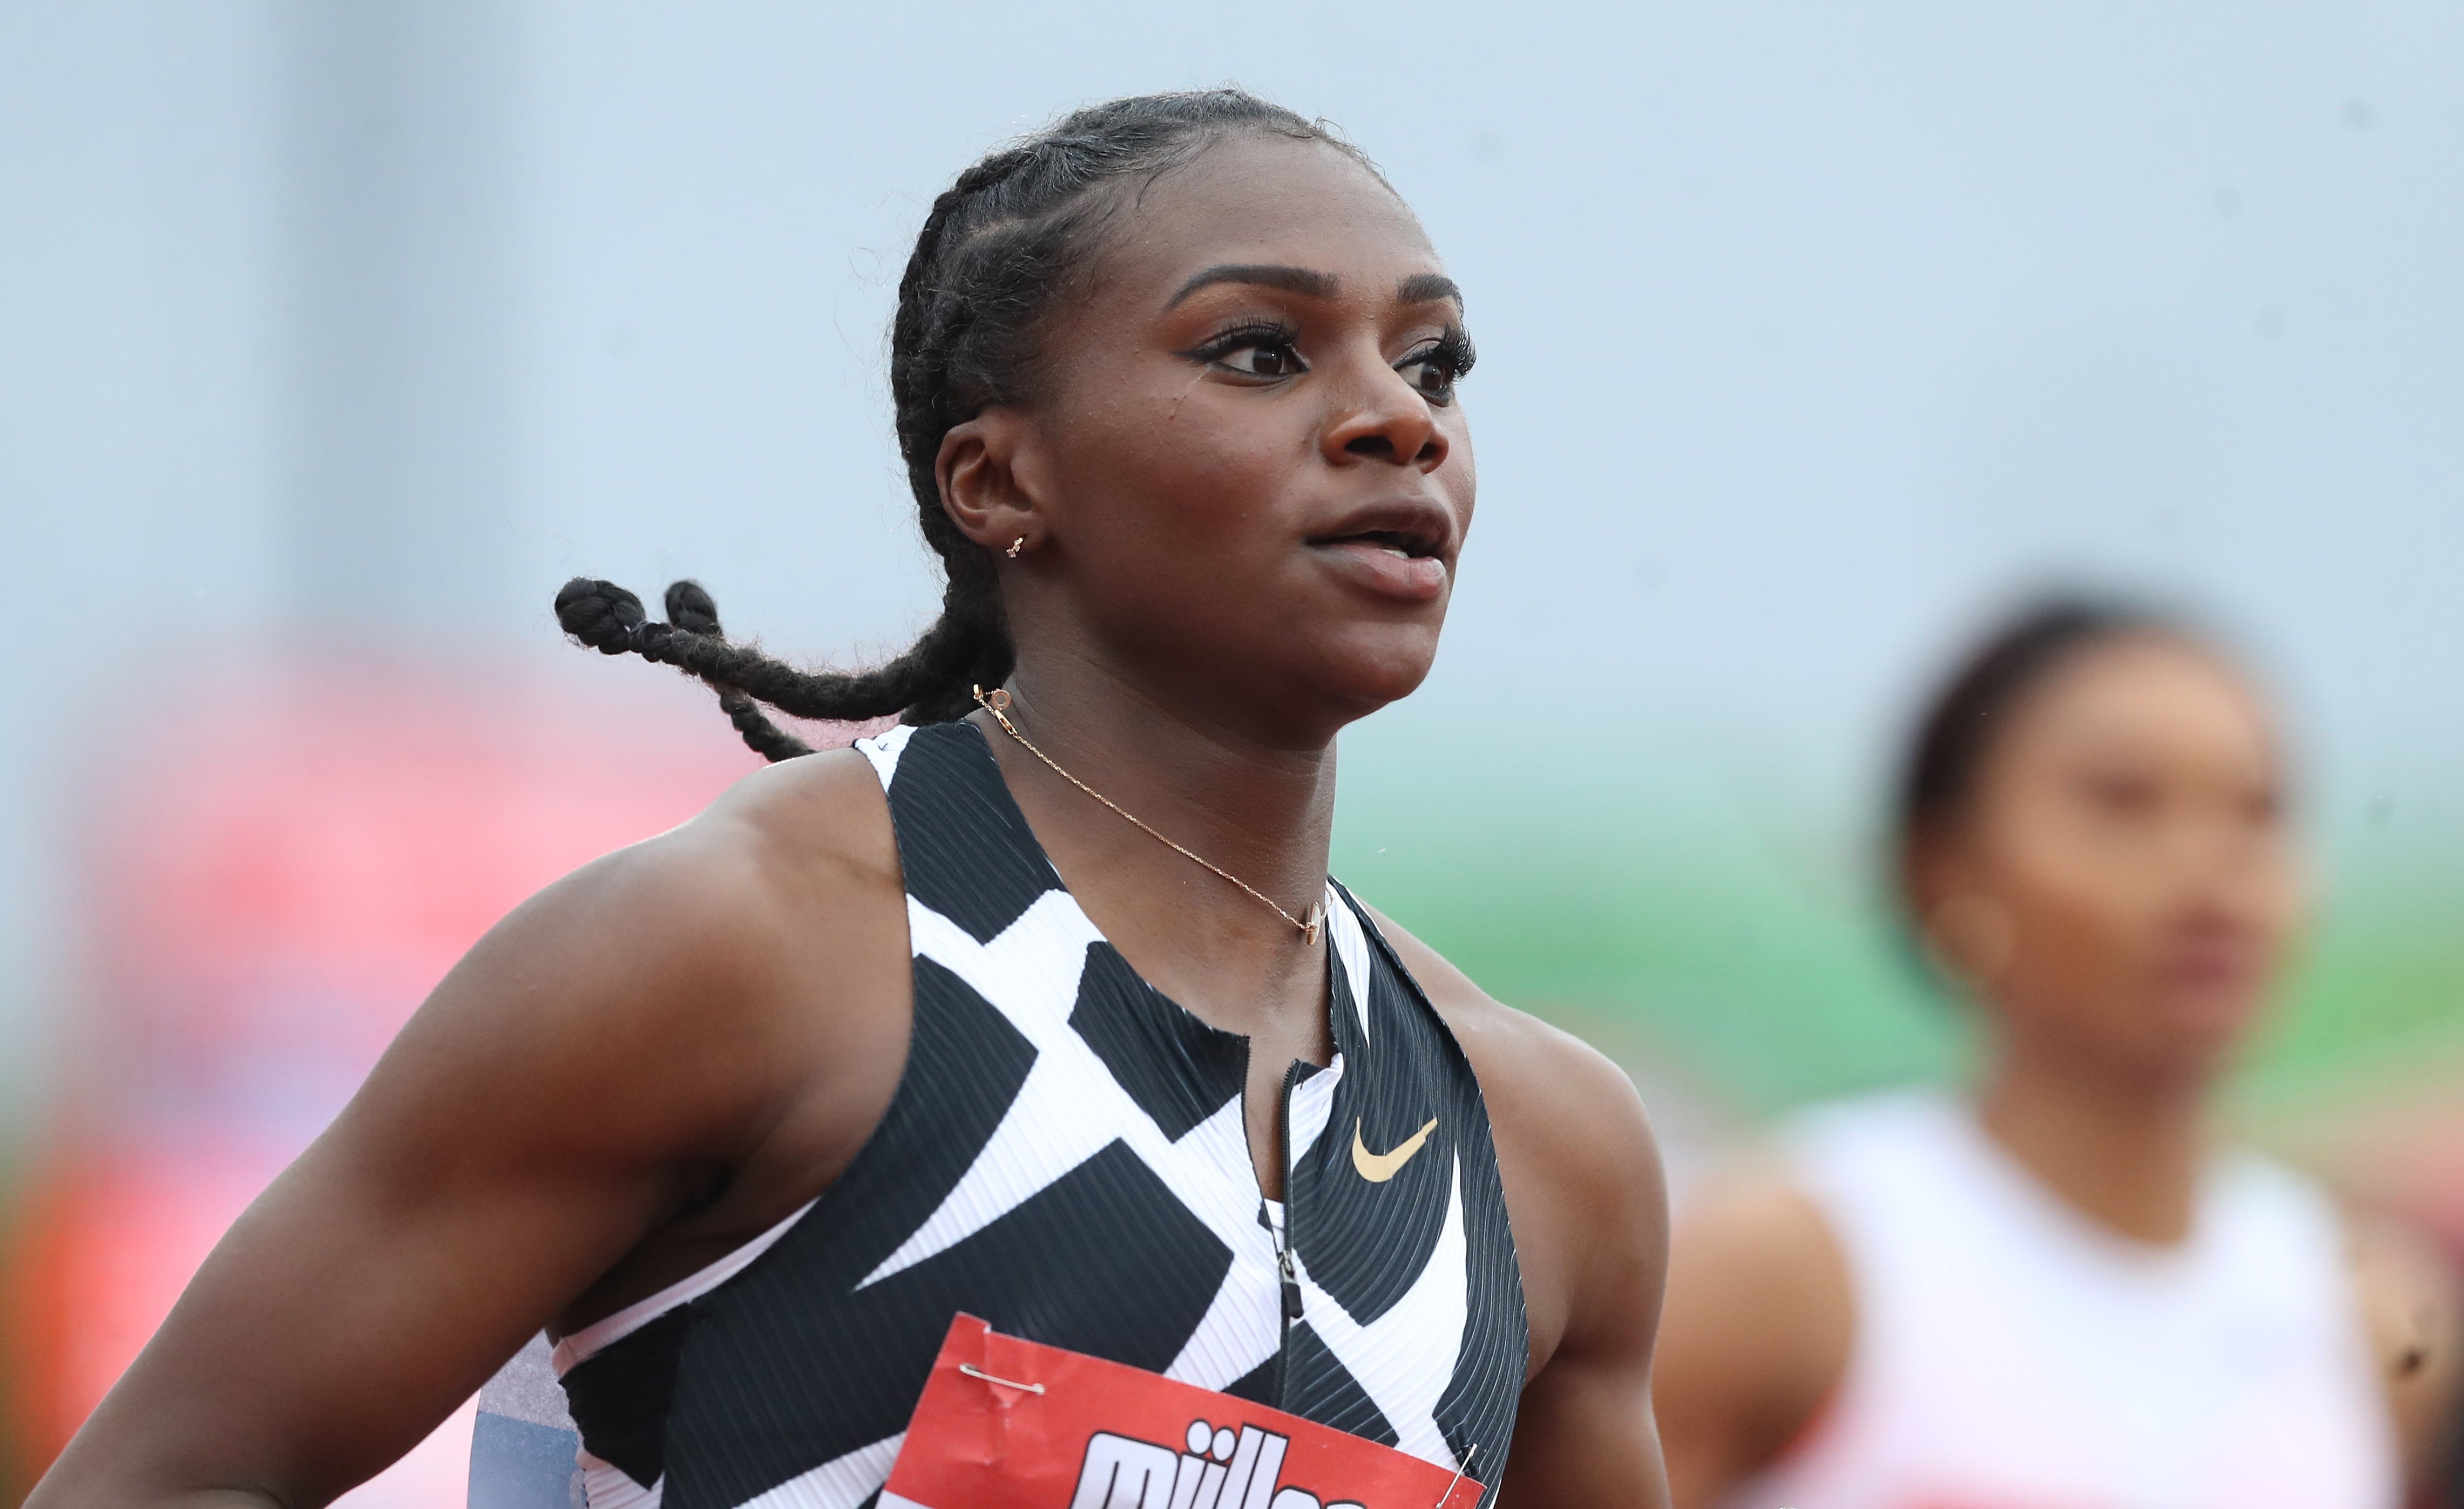 Dina Asher-Smith booked her place at the 2021 Tokyo Olympics